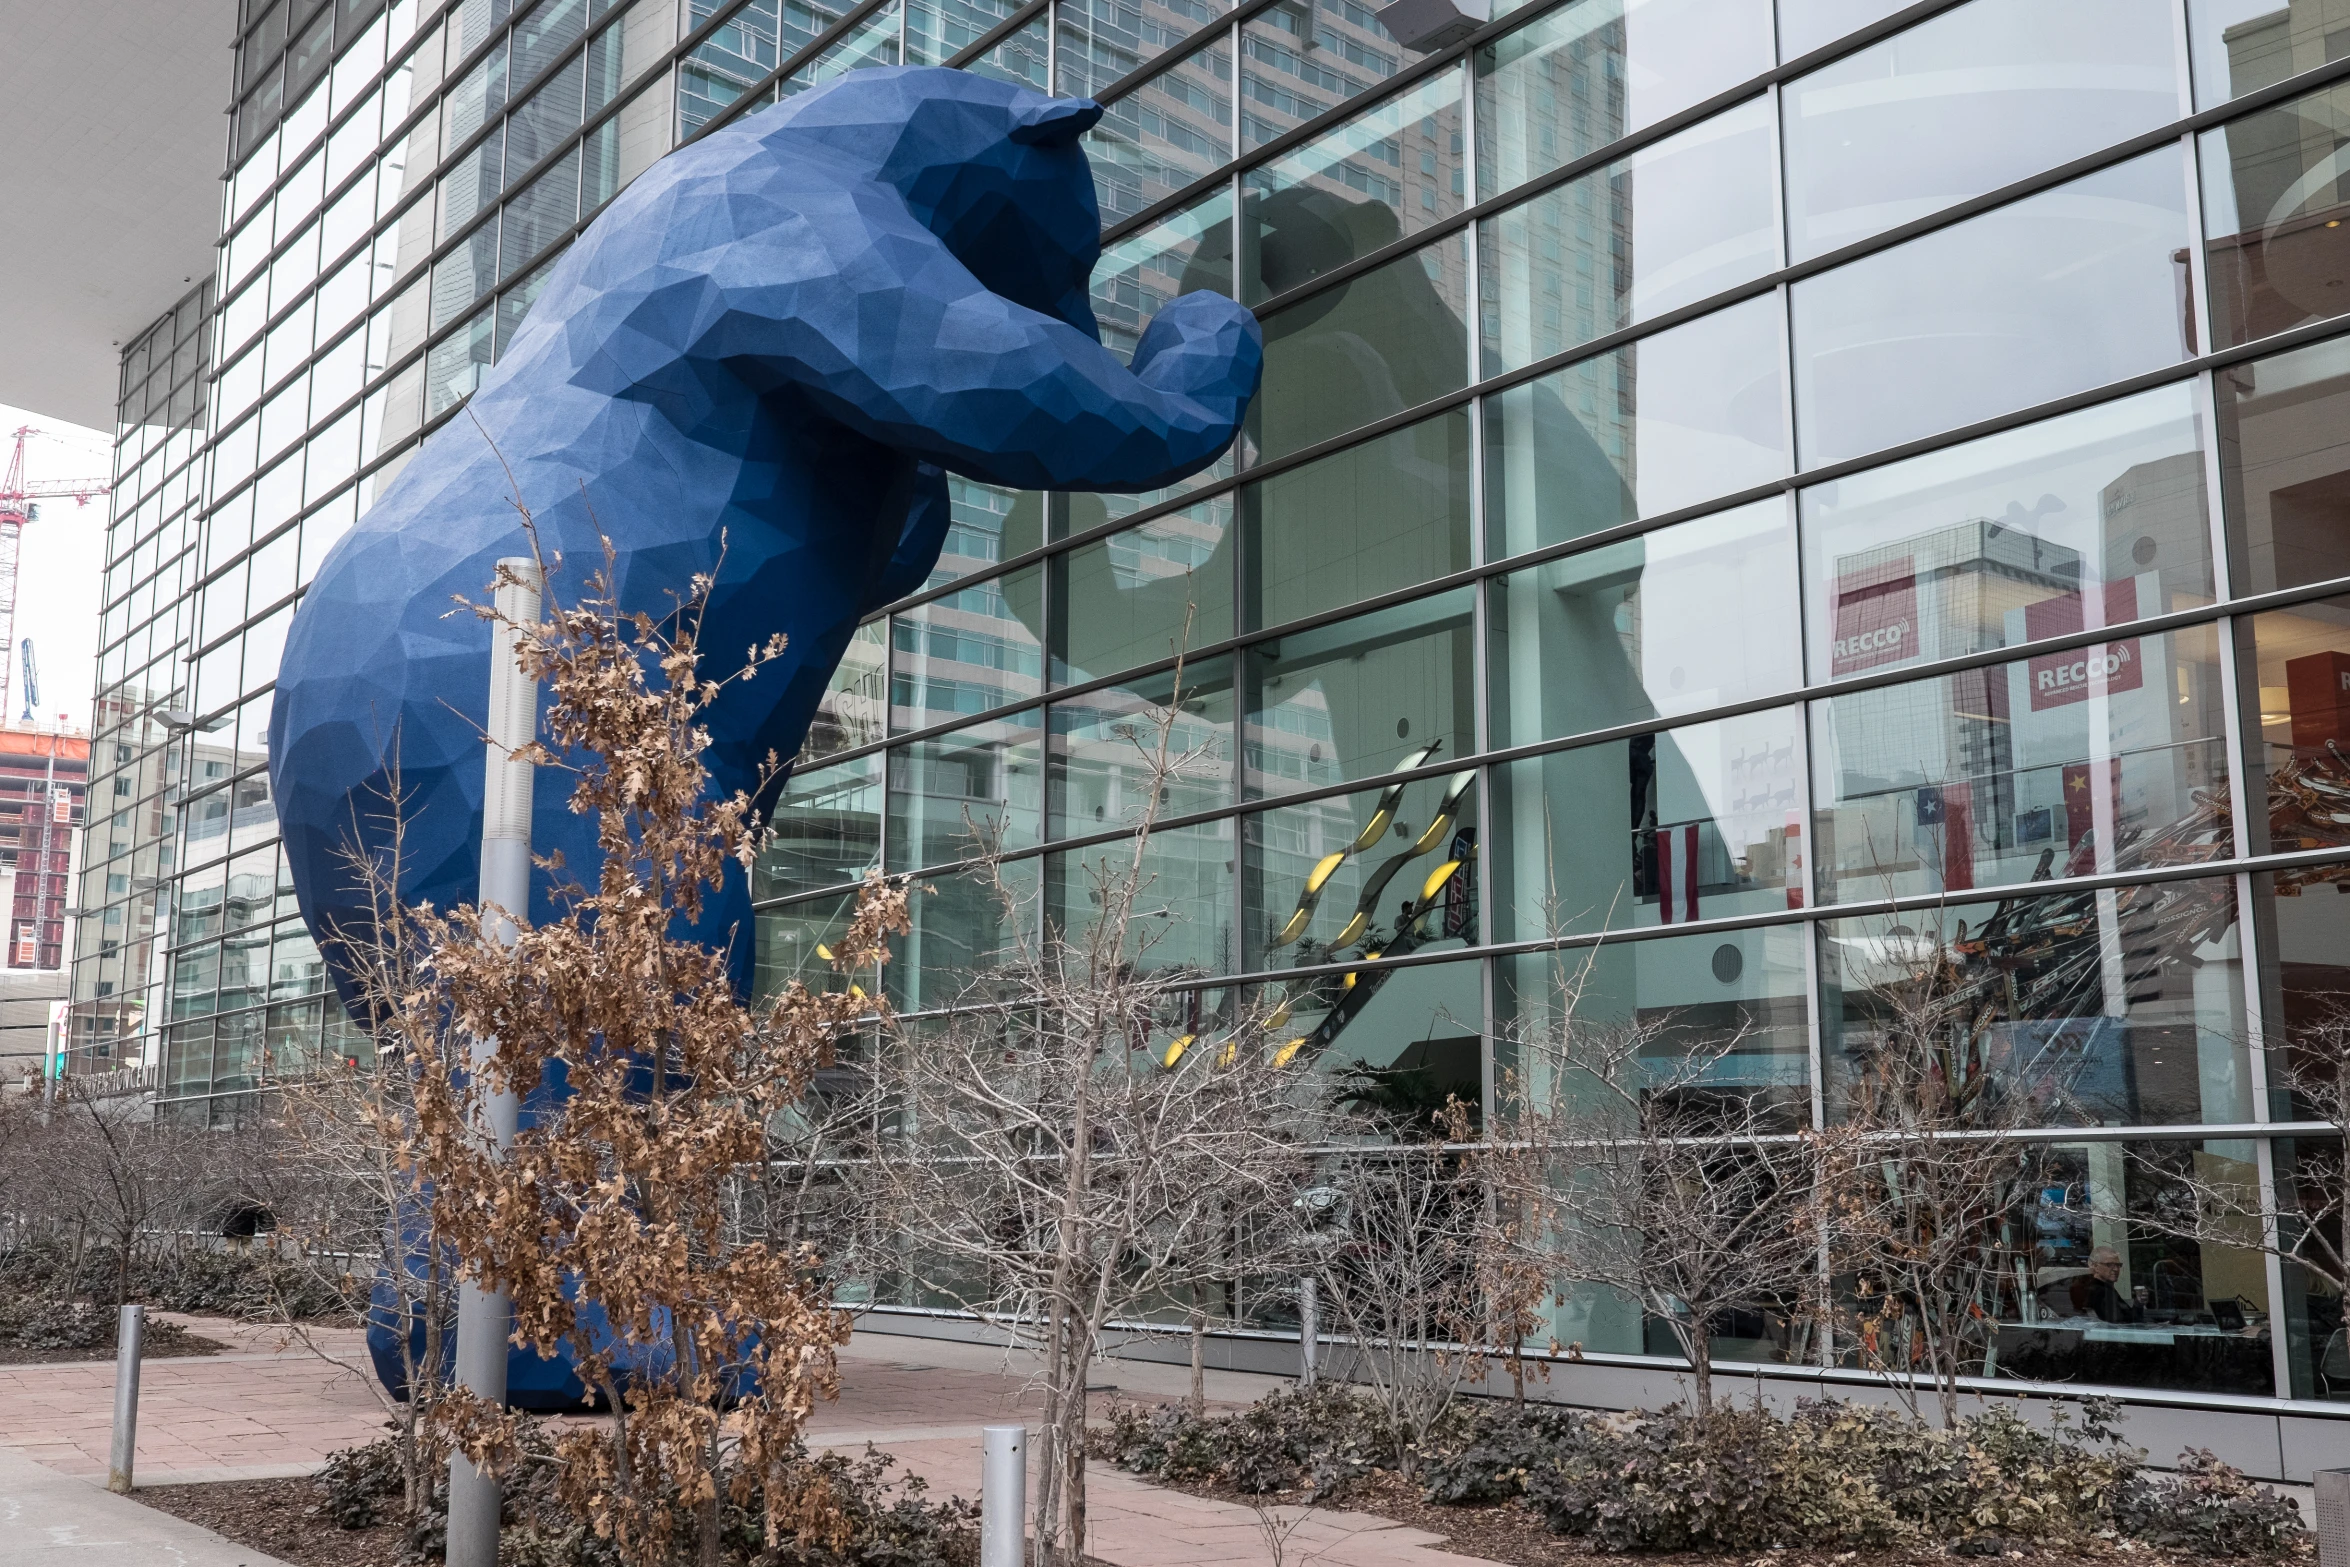 a sculpture of a bear stands in front of a tall building